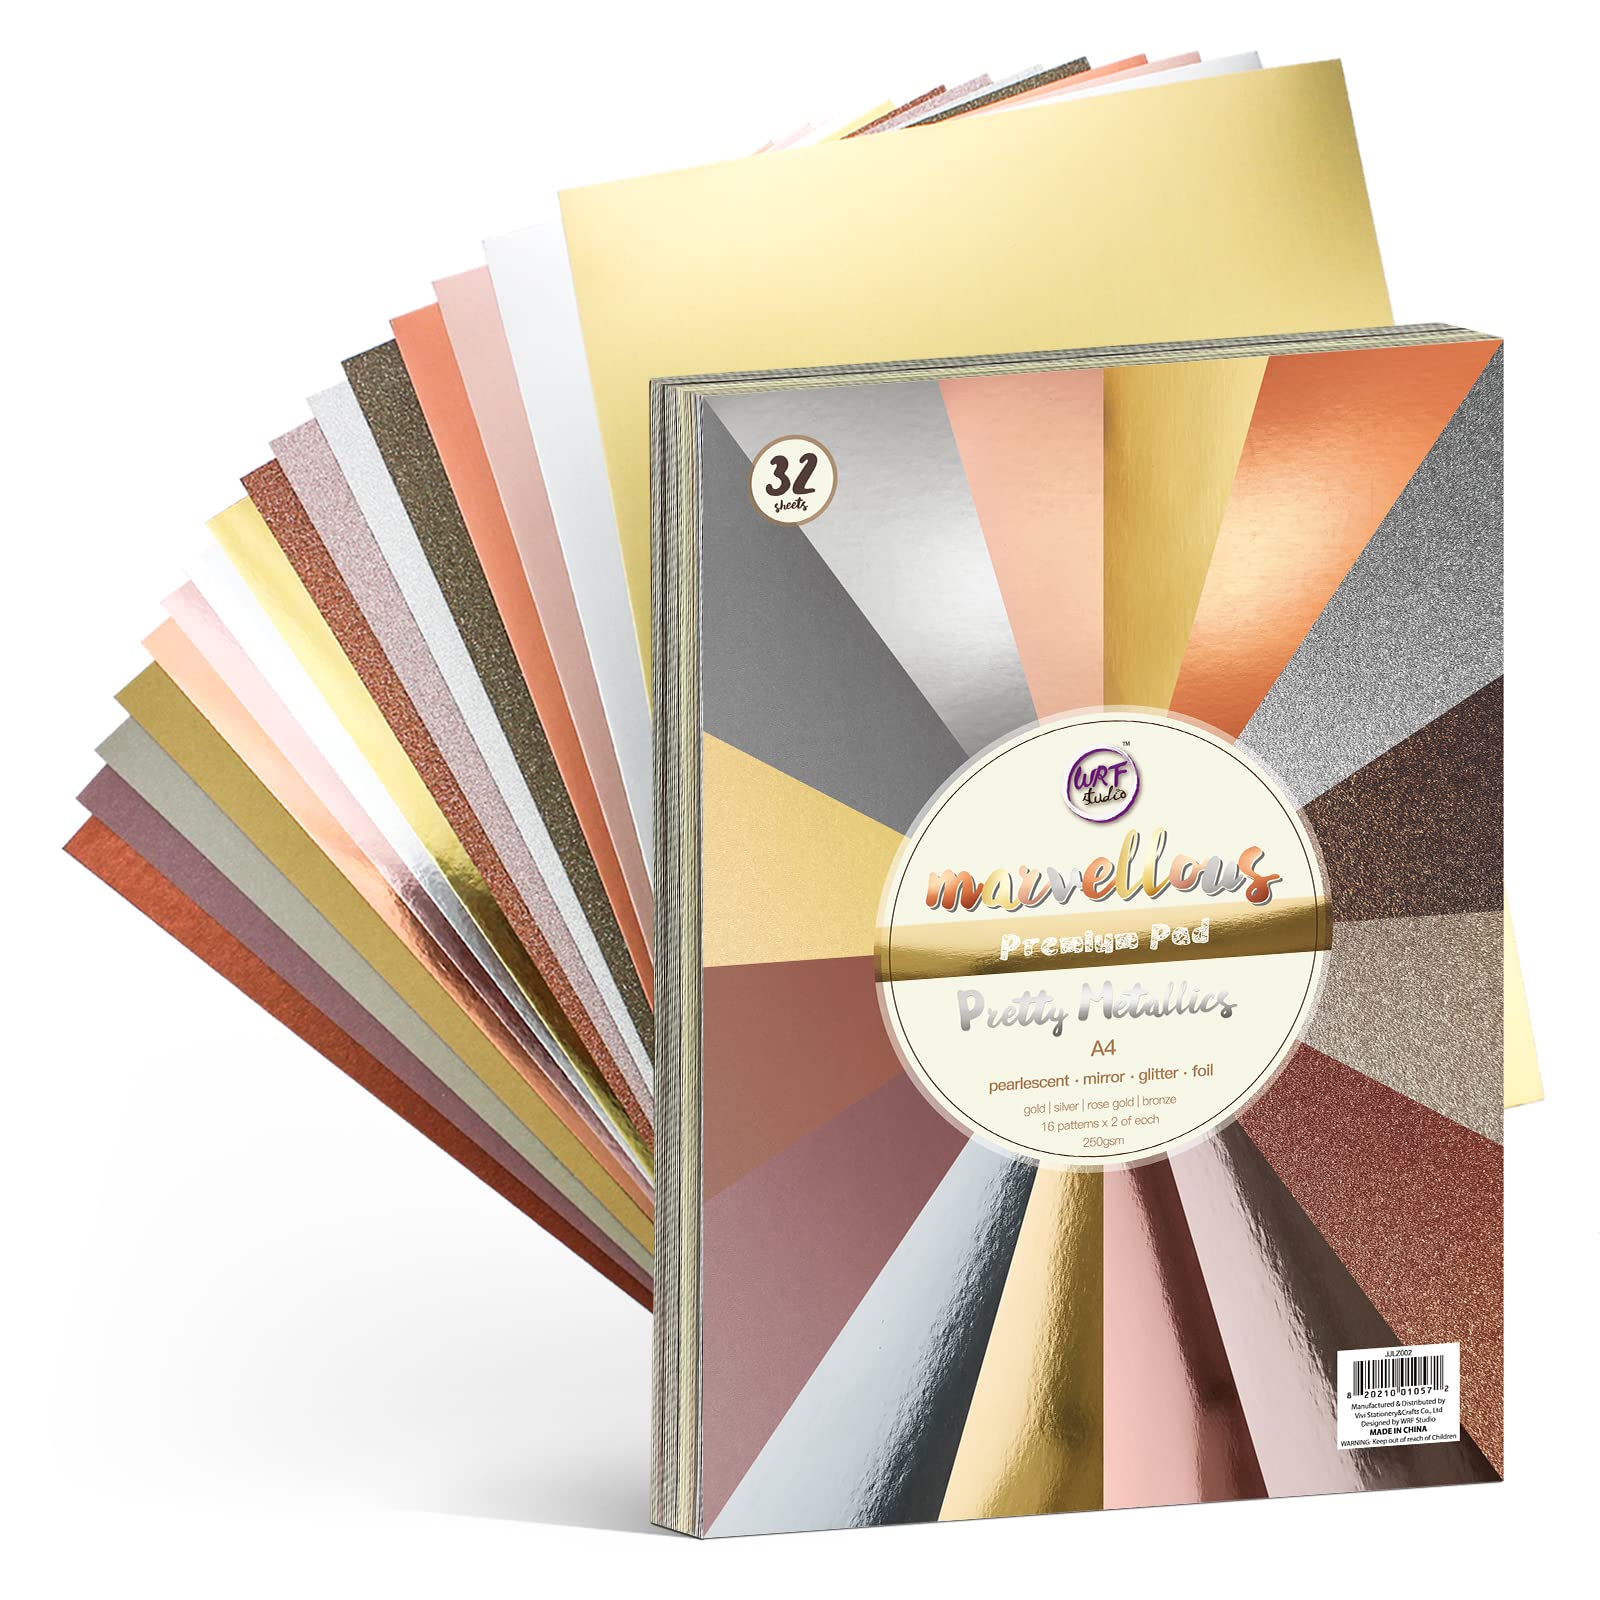 A4 Holographic Cardstock - 5 Colors